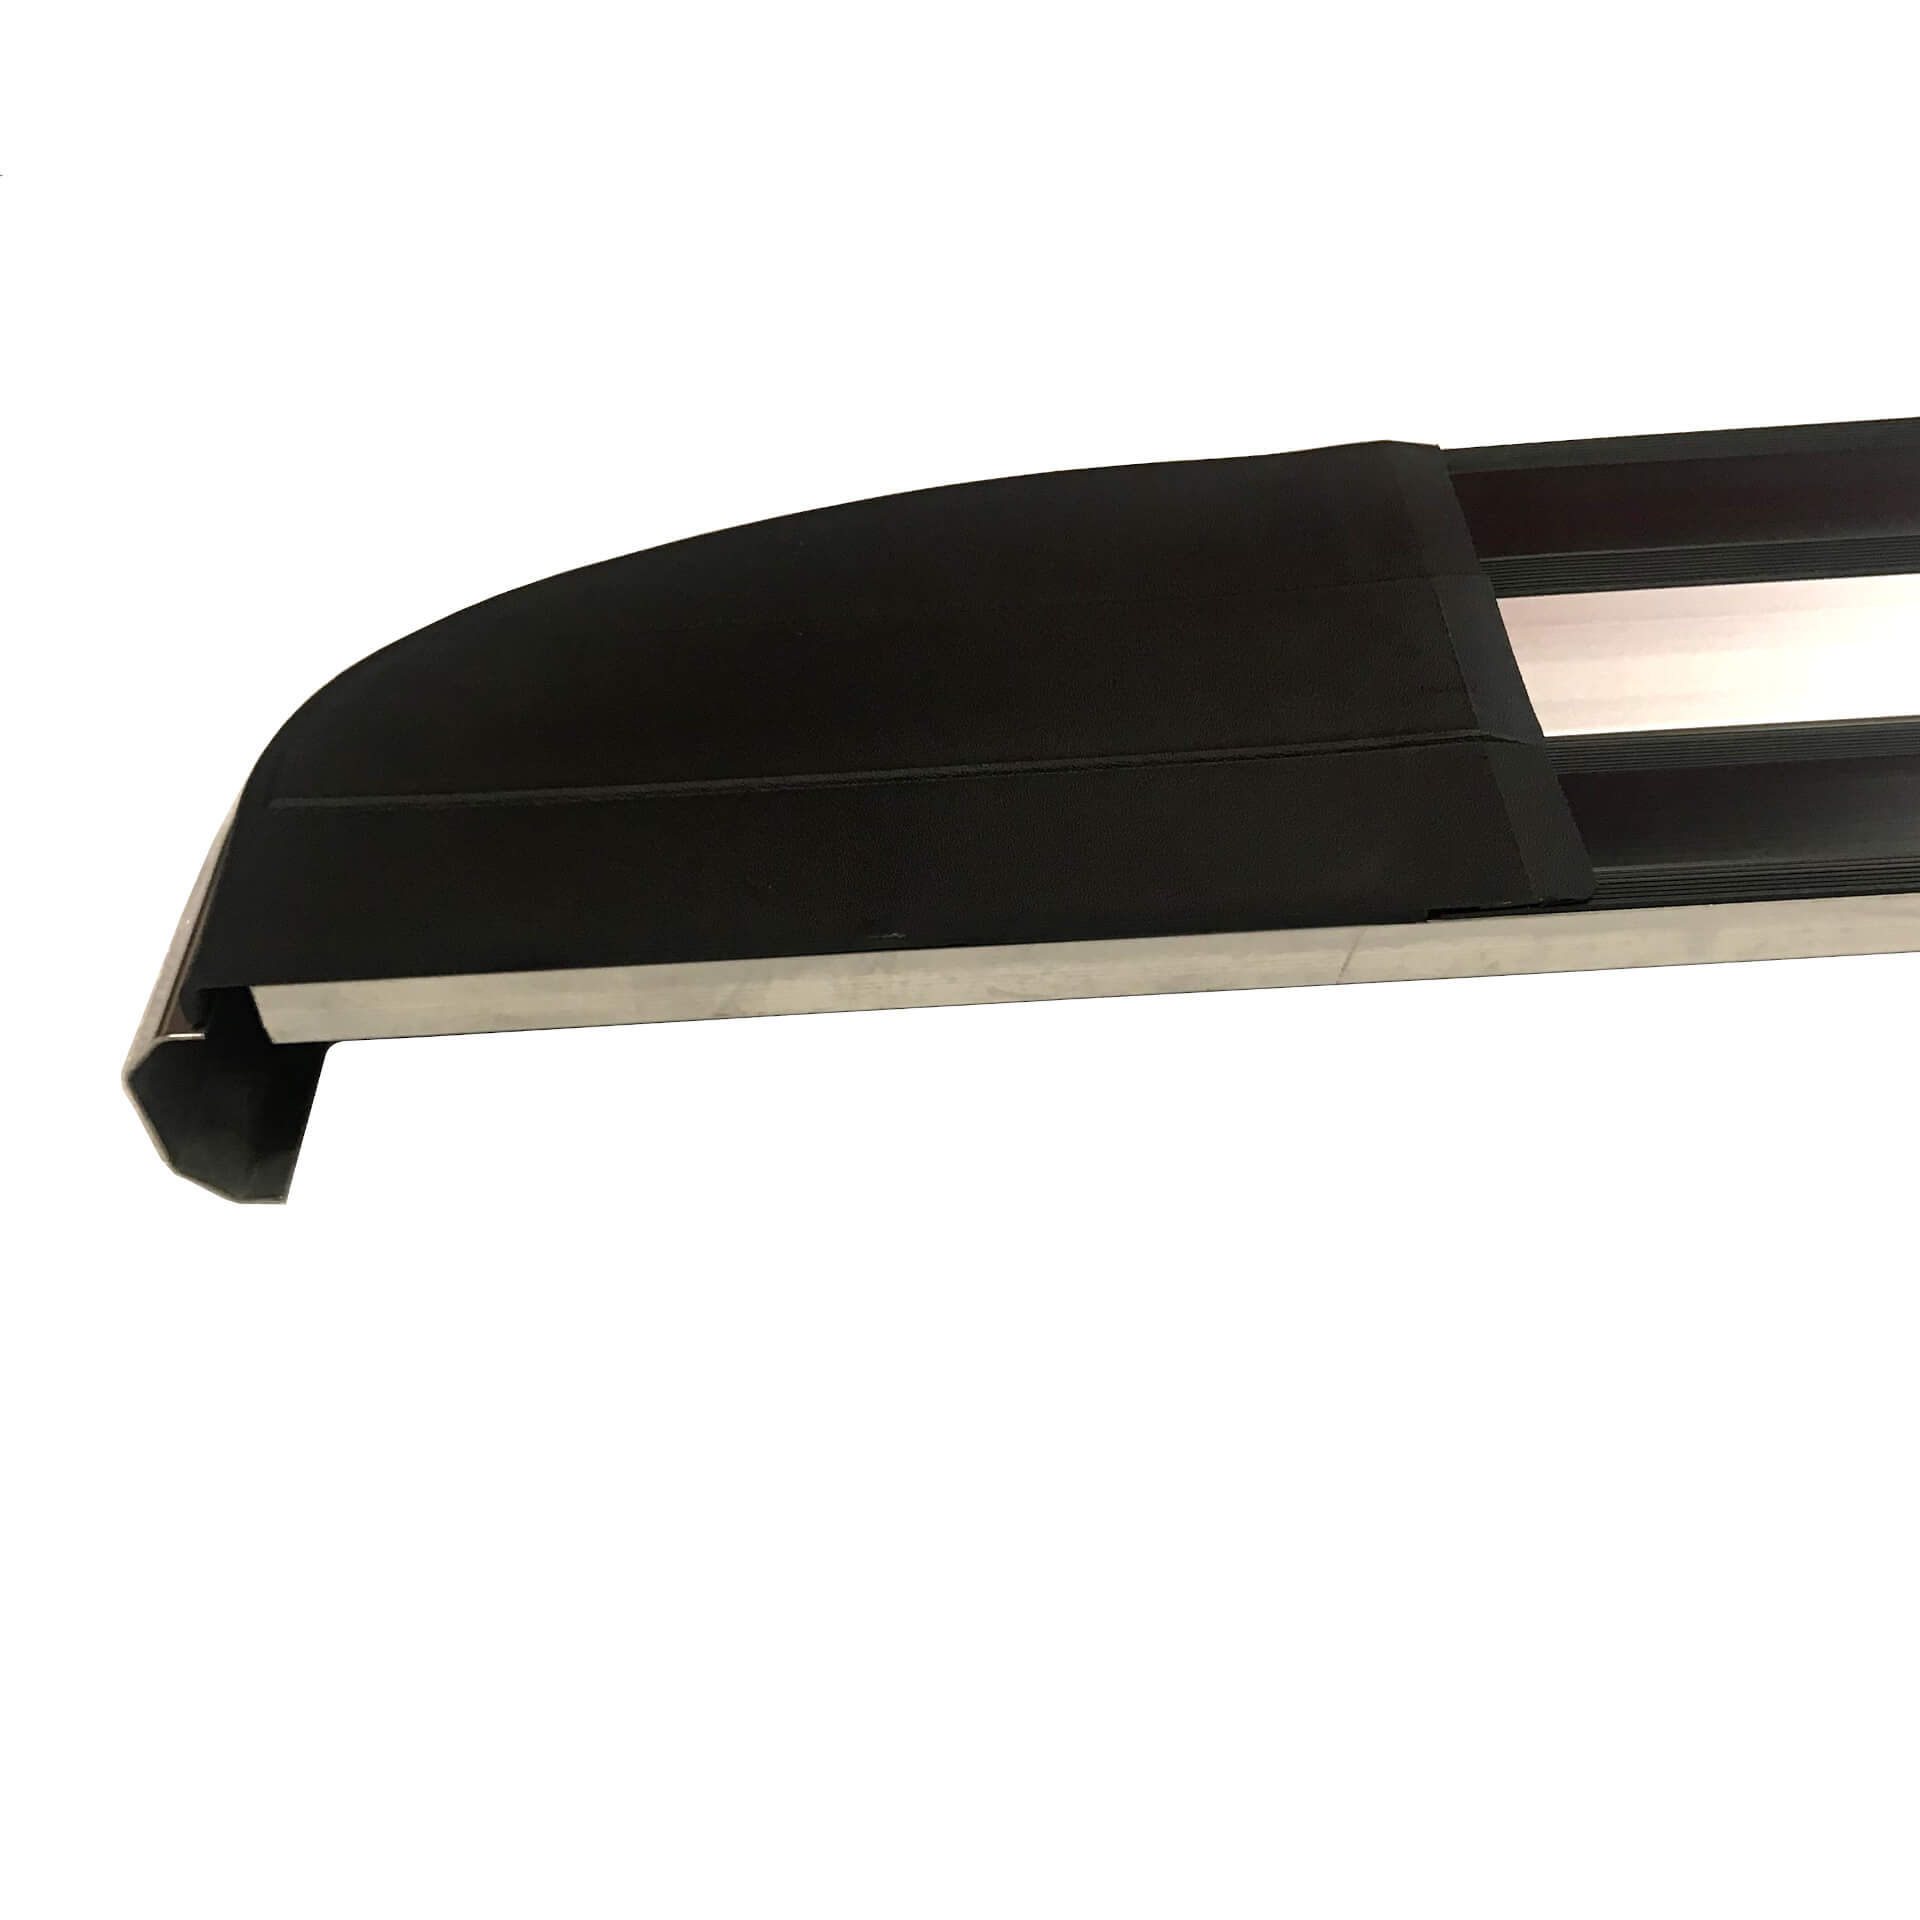 Panther Side Steps Running Boards for Hyundai ix35 2010-2015 -  - sold by Direct4x4